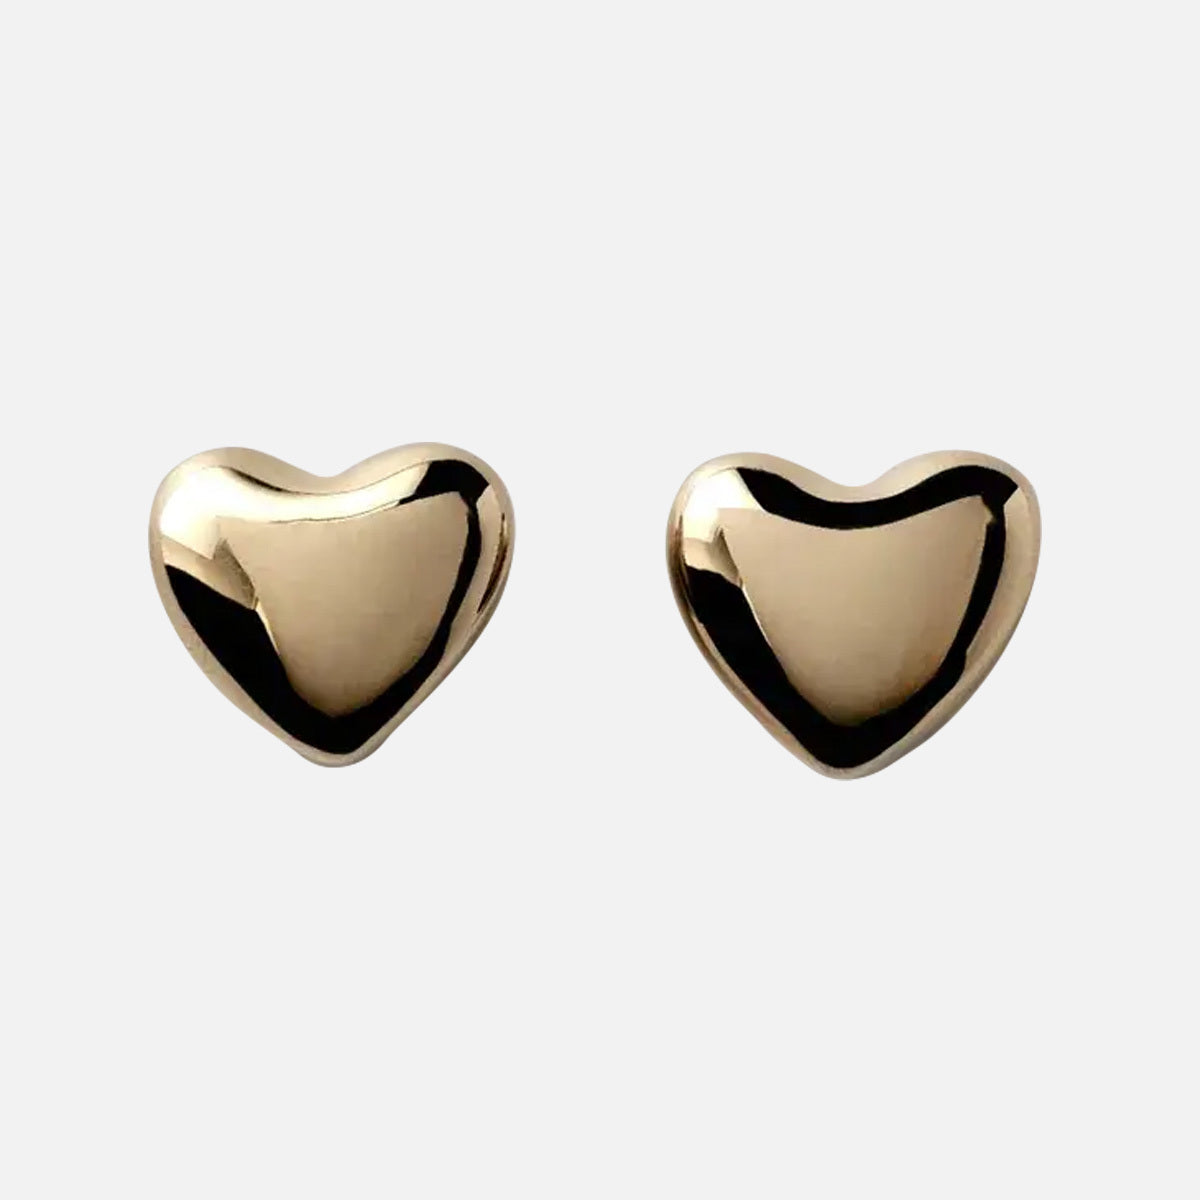 Gold Plated Voluptuous Heart Earrings, Large